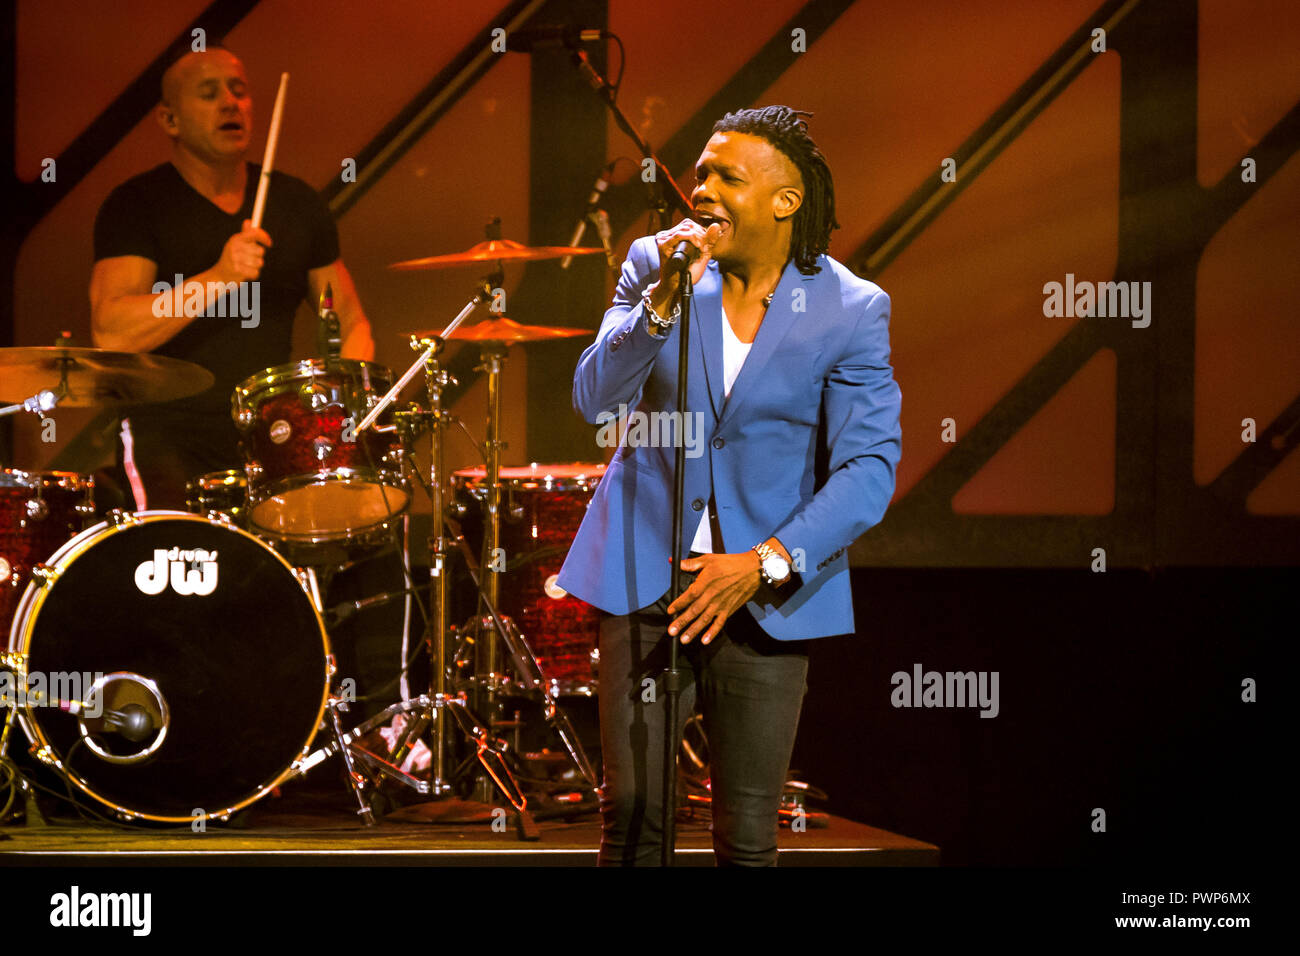 Nashville, Tennessee, USA. 16th Oct, 2018. Newsboys United performing at the 49th GMA Dove Awards were held at Lipscomb University's Allen Arena in Nashville. Michael Tait and longtime members Duncan Phillips, Jeff Frankenstein and Jody Davis united with former drummer/lead vocalist Peter Furler and bassist Phil Joel. Credit: Jason Walle/ZUMA Wire/Alamy Live News Stock Photo